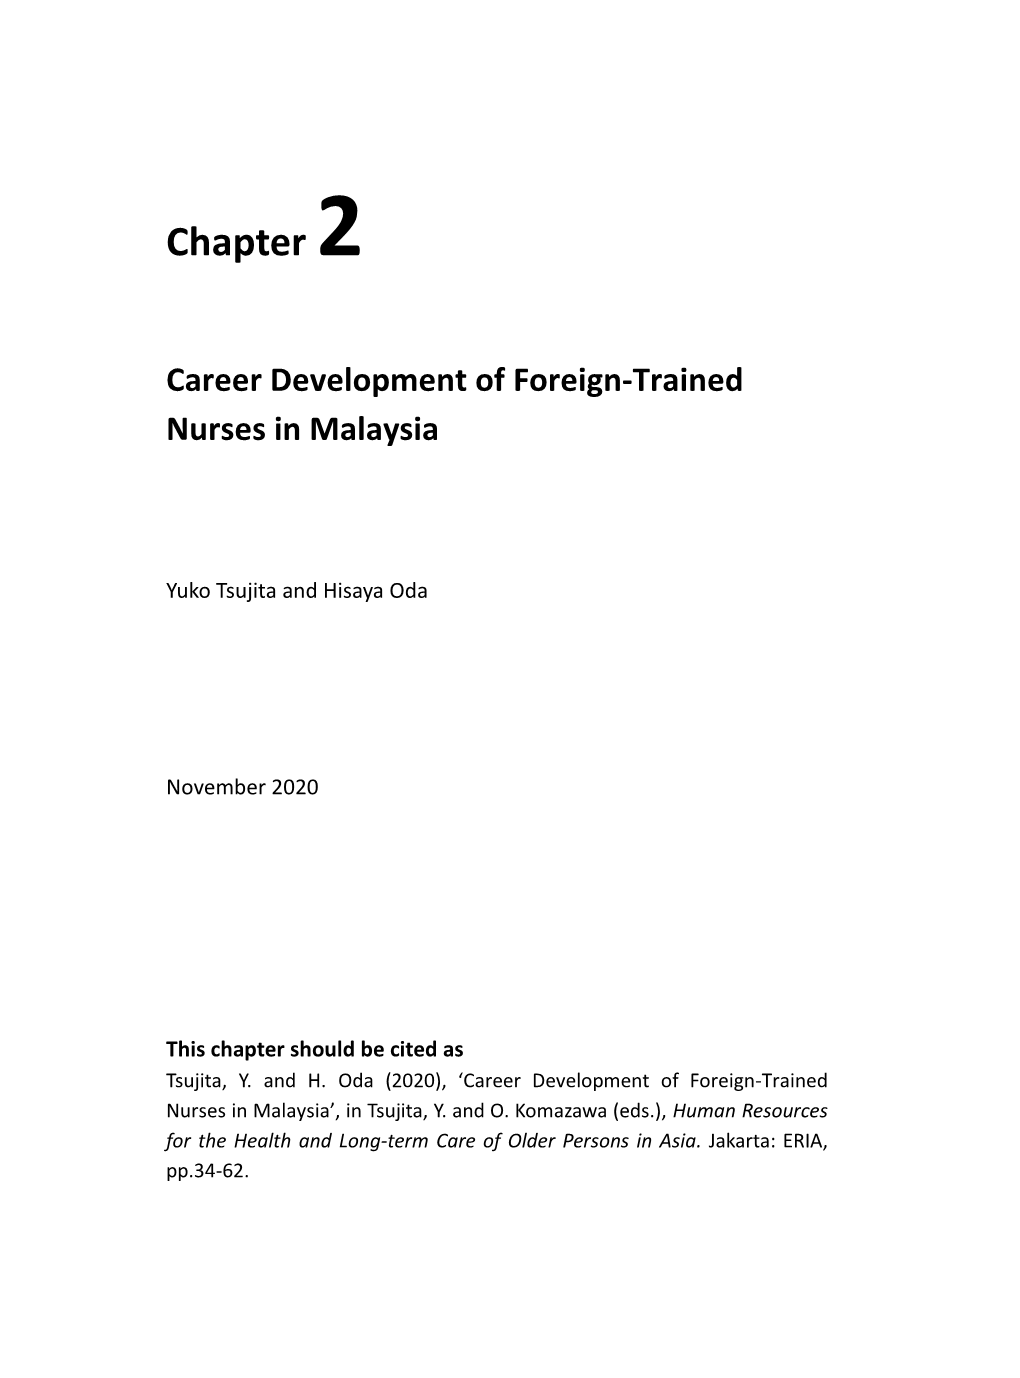 Career Development of Foreign-Trained Nurses in Malaysia